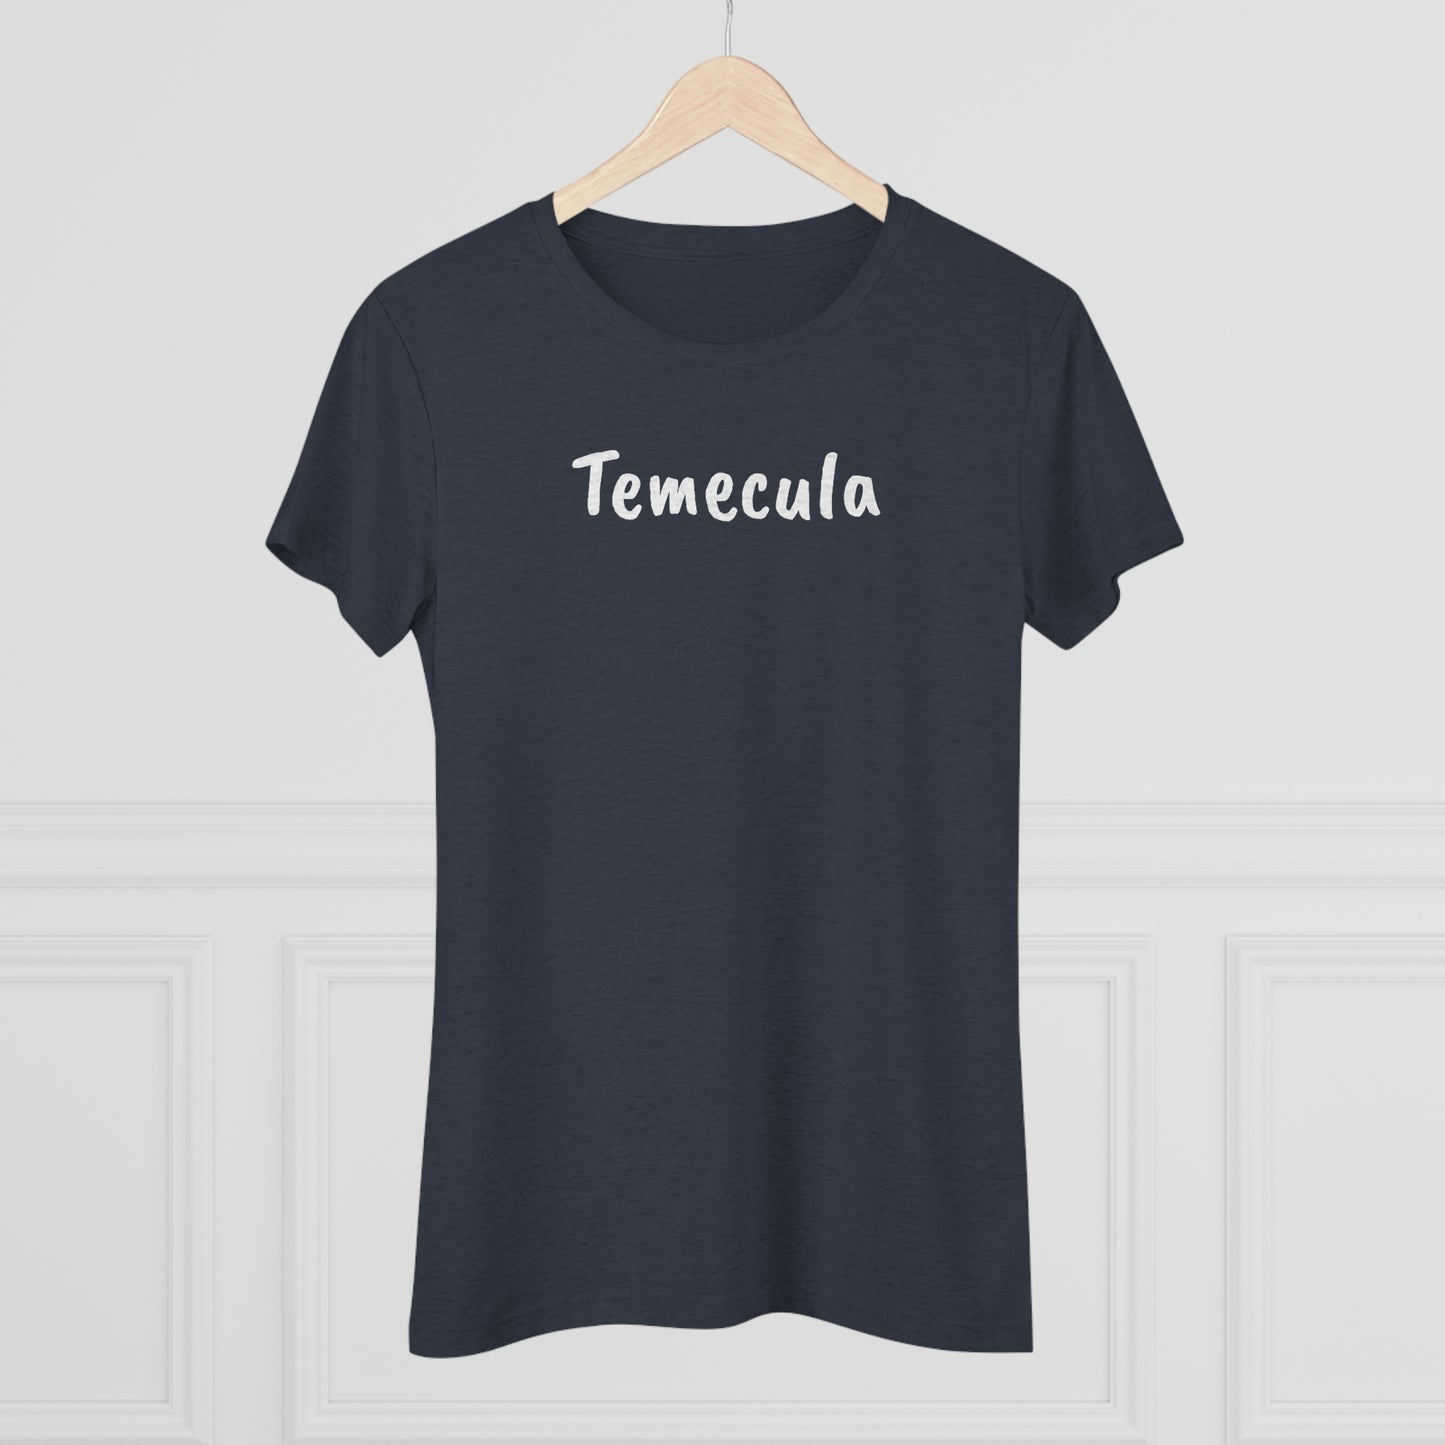 Wine Country Temecula Women's fitted Triblend Tee  tee shirt